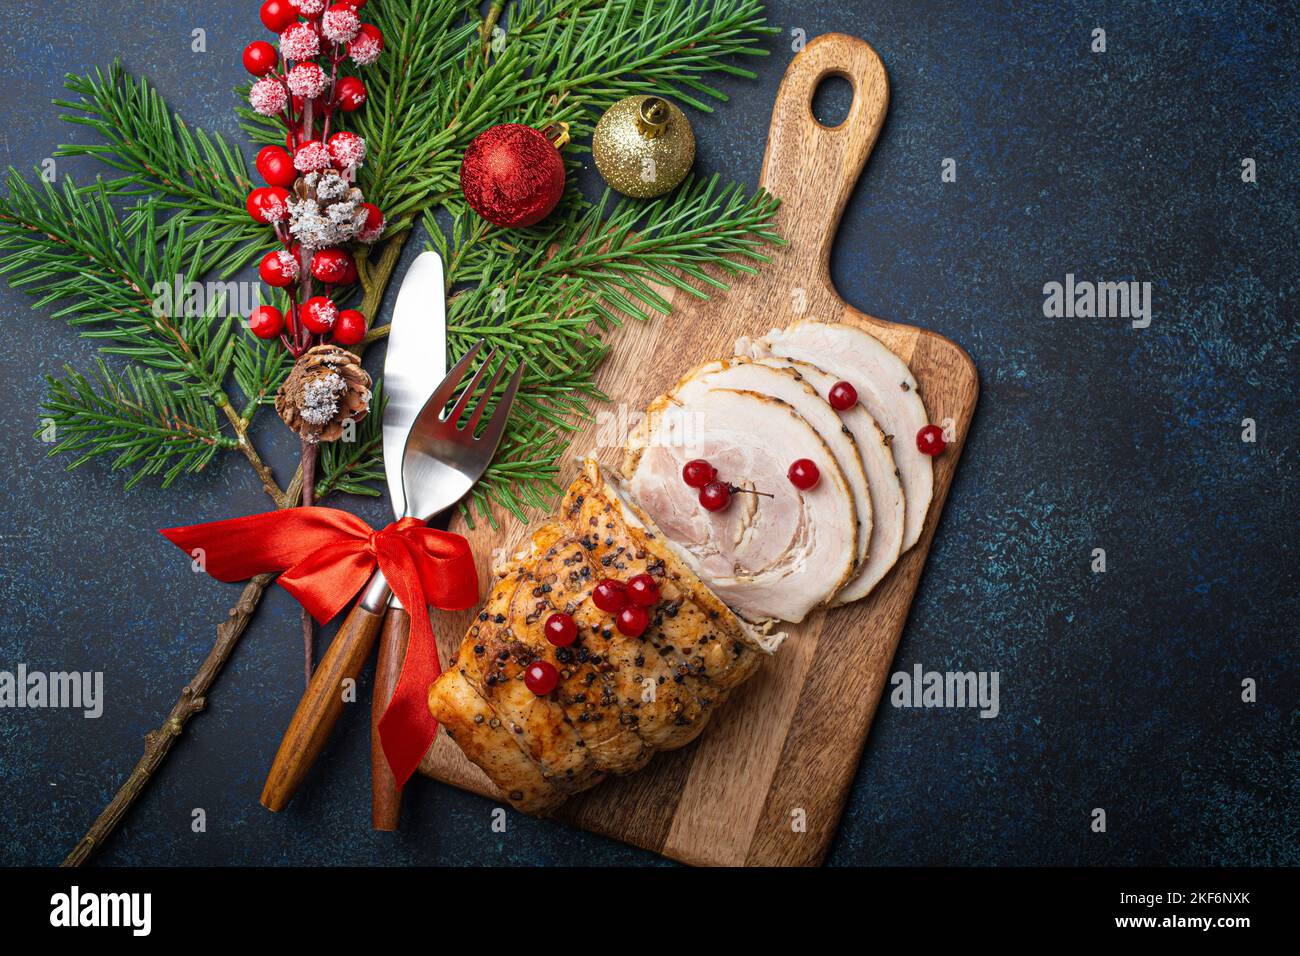 Christmas baked ham sliced with red berries and festive decorations Stock Photo